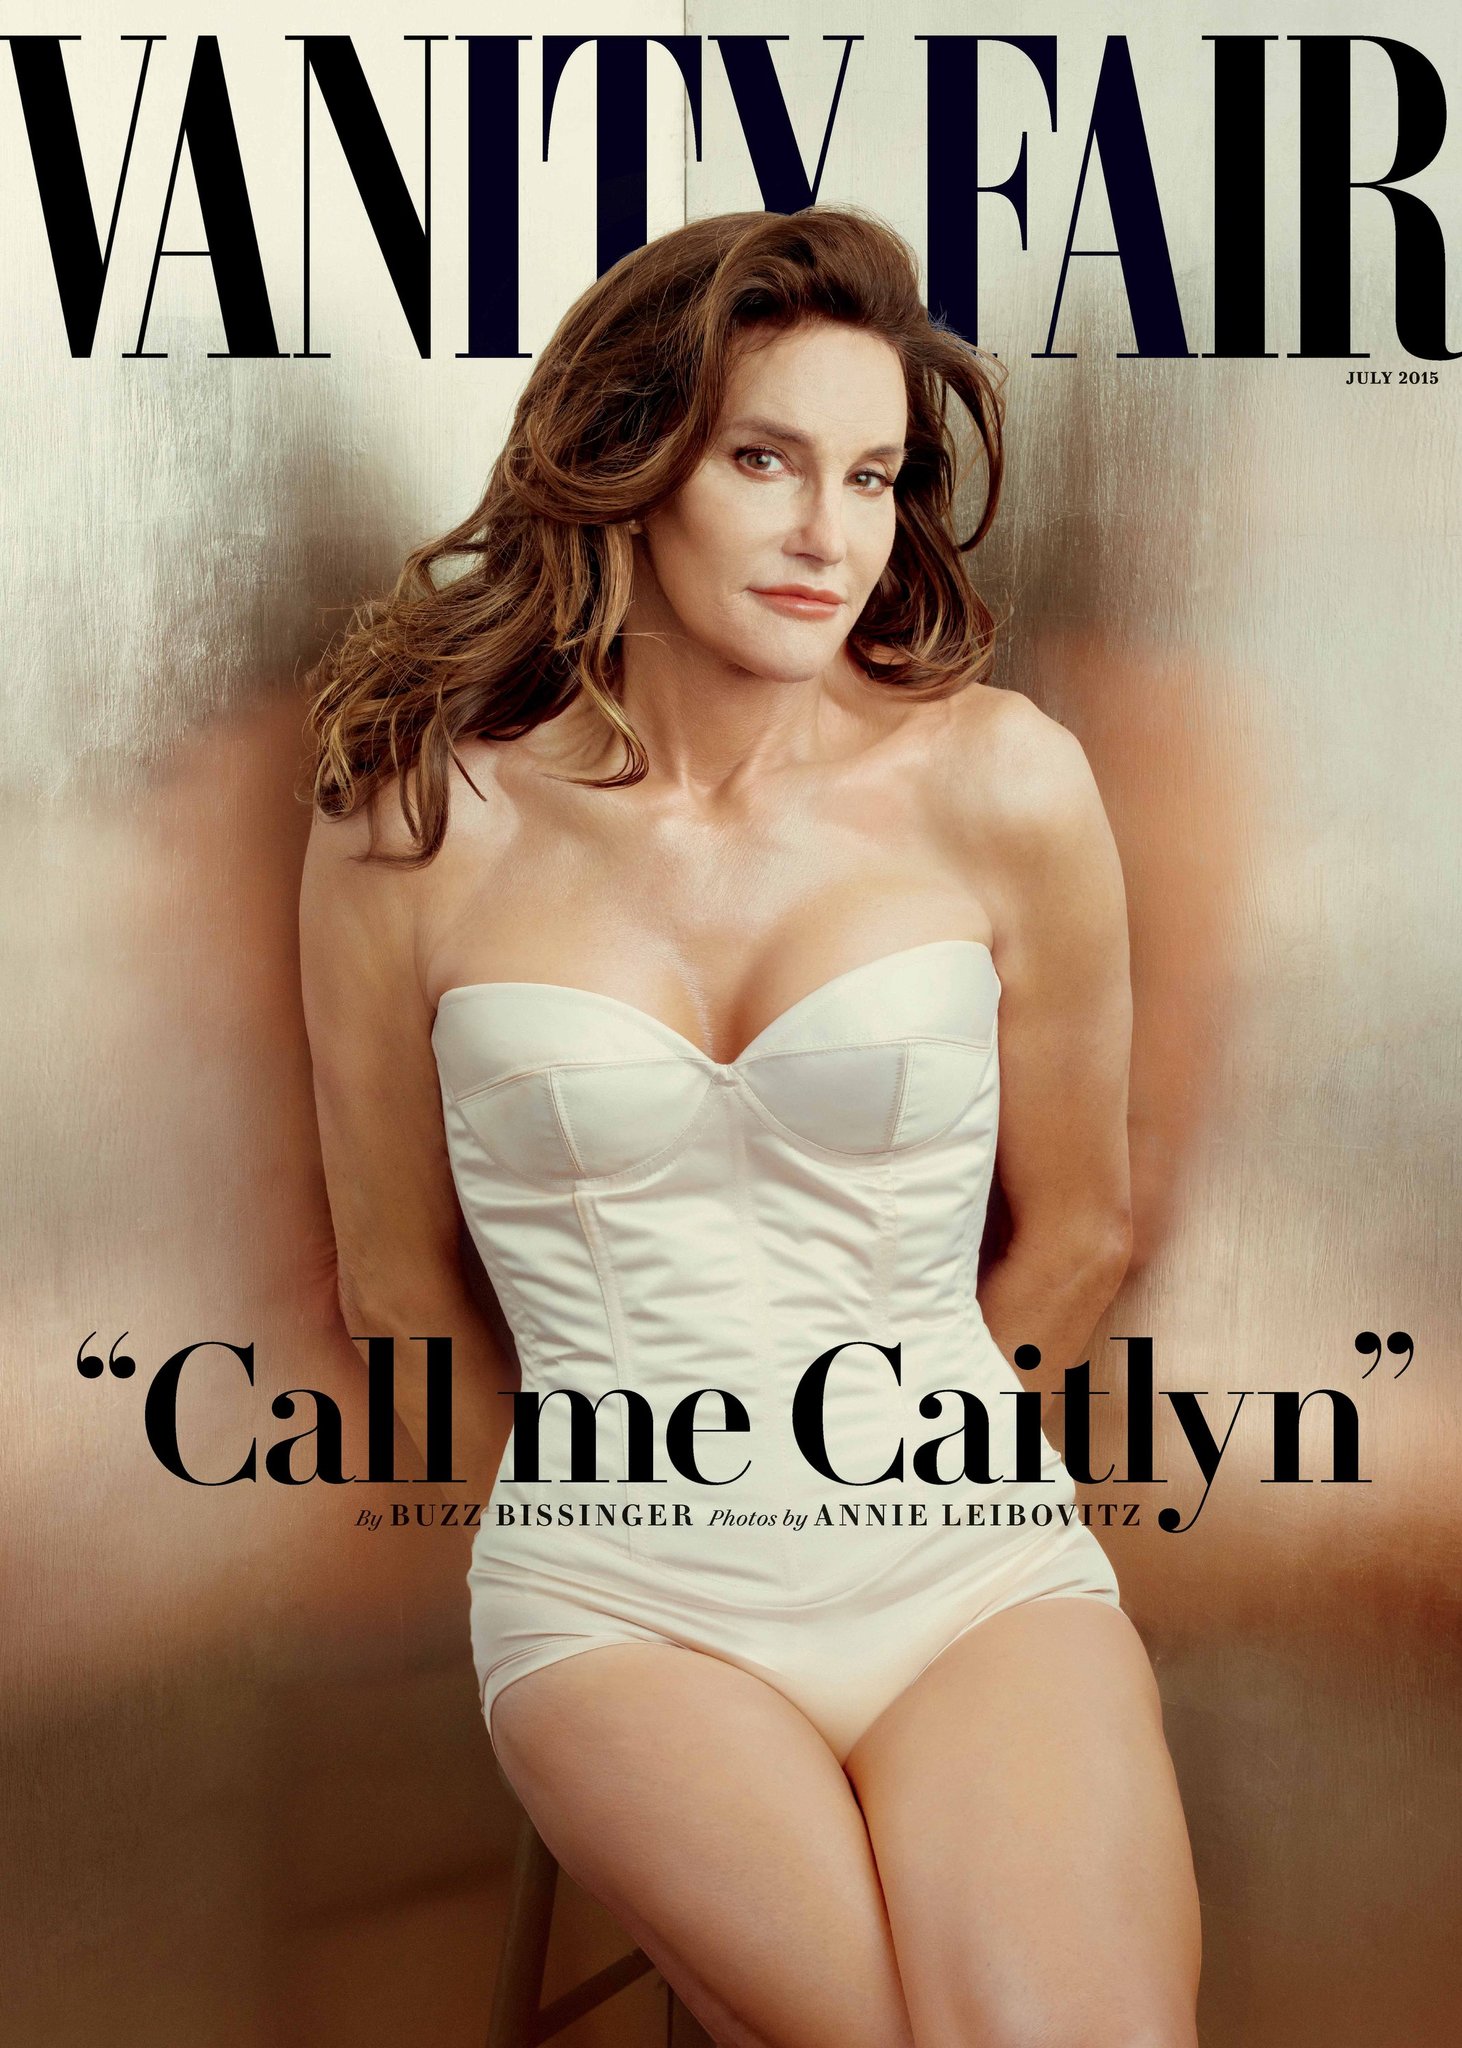 Caitlyn Jenner, Formerly Bruce, Introduces Herself in Vanity Fair